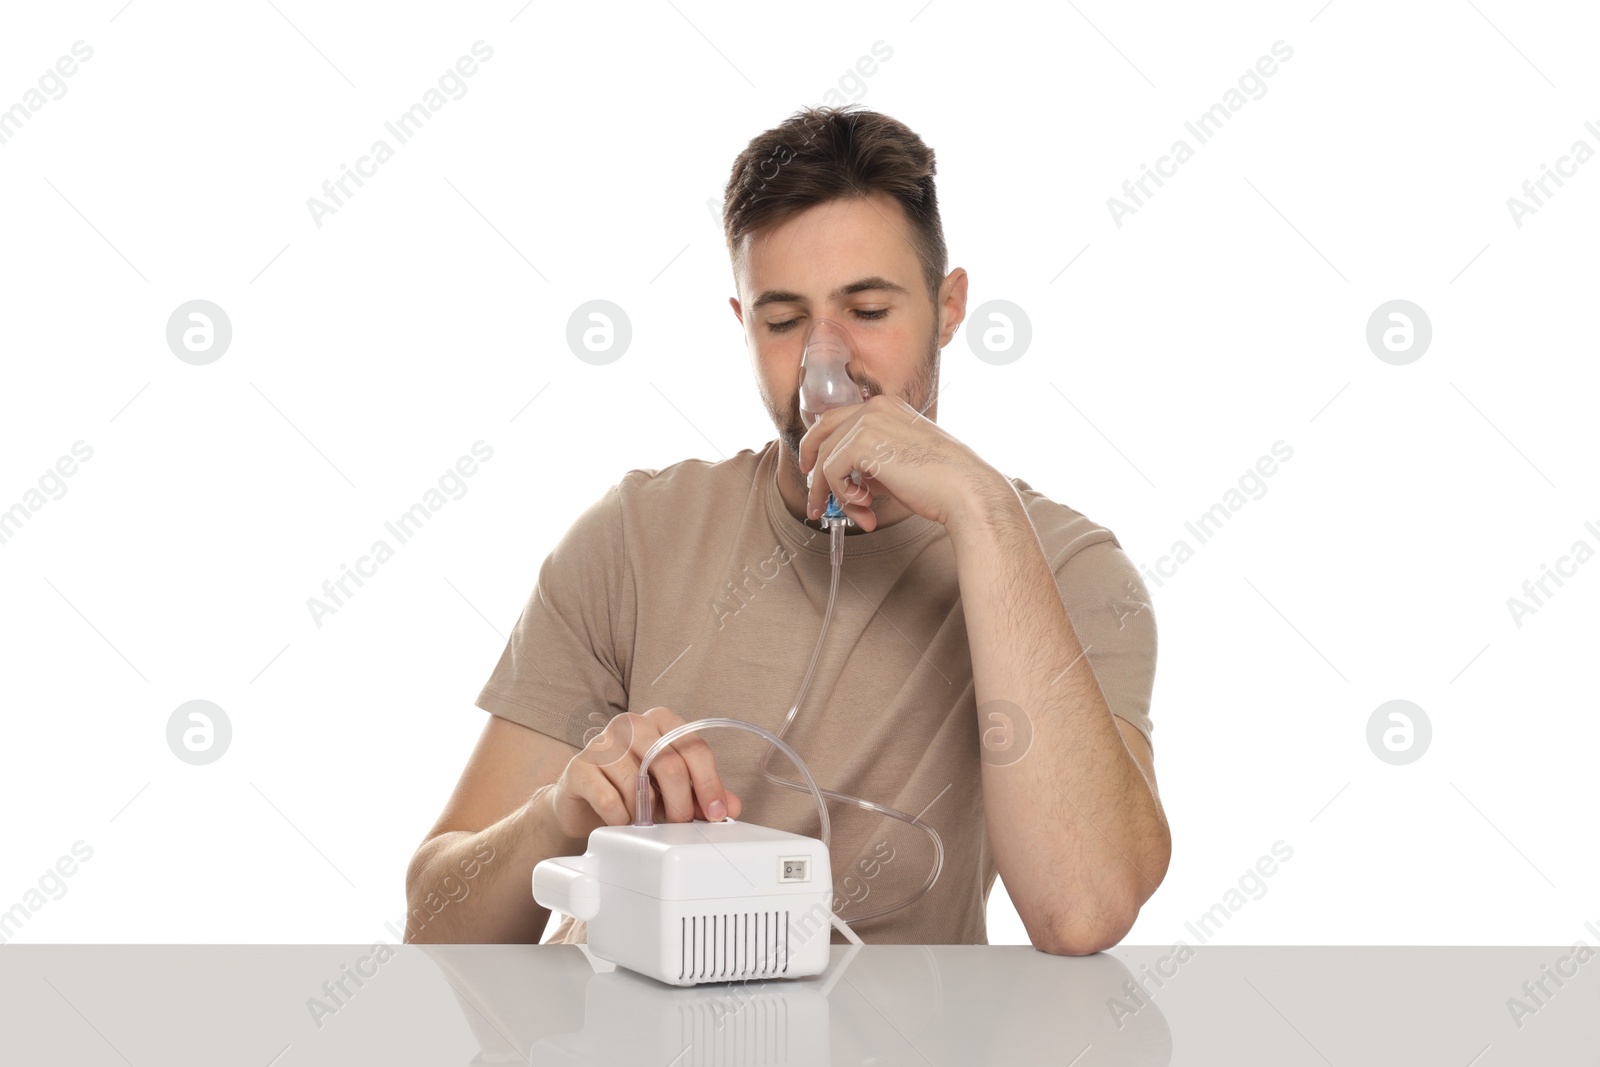 Photo of Sick man using nebulizer for inhalation at table on white background